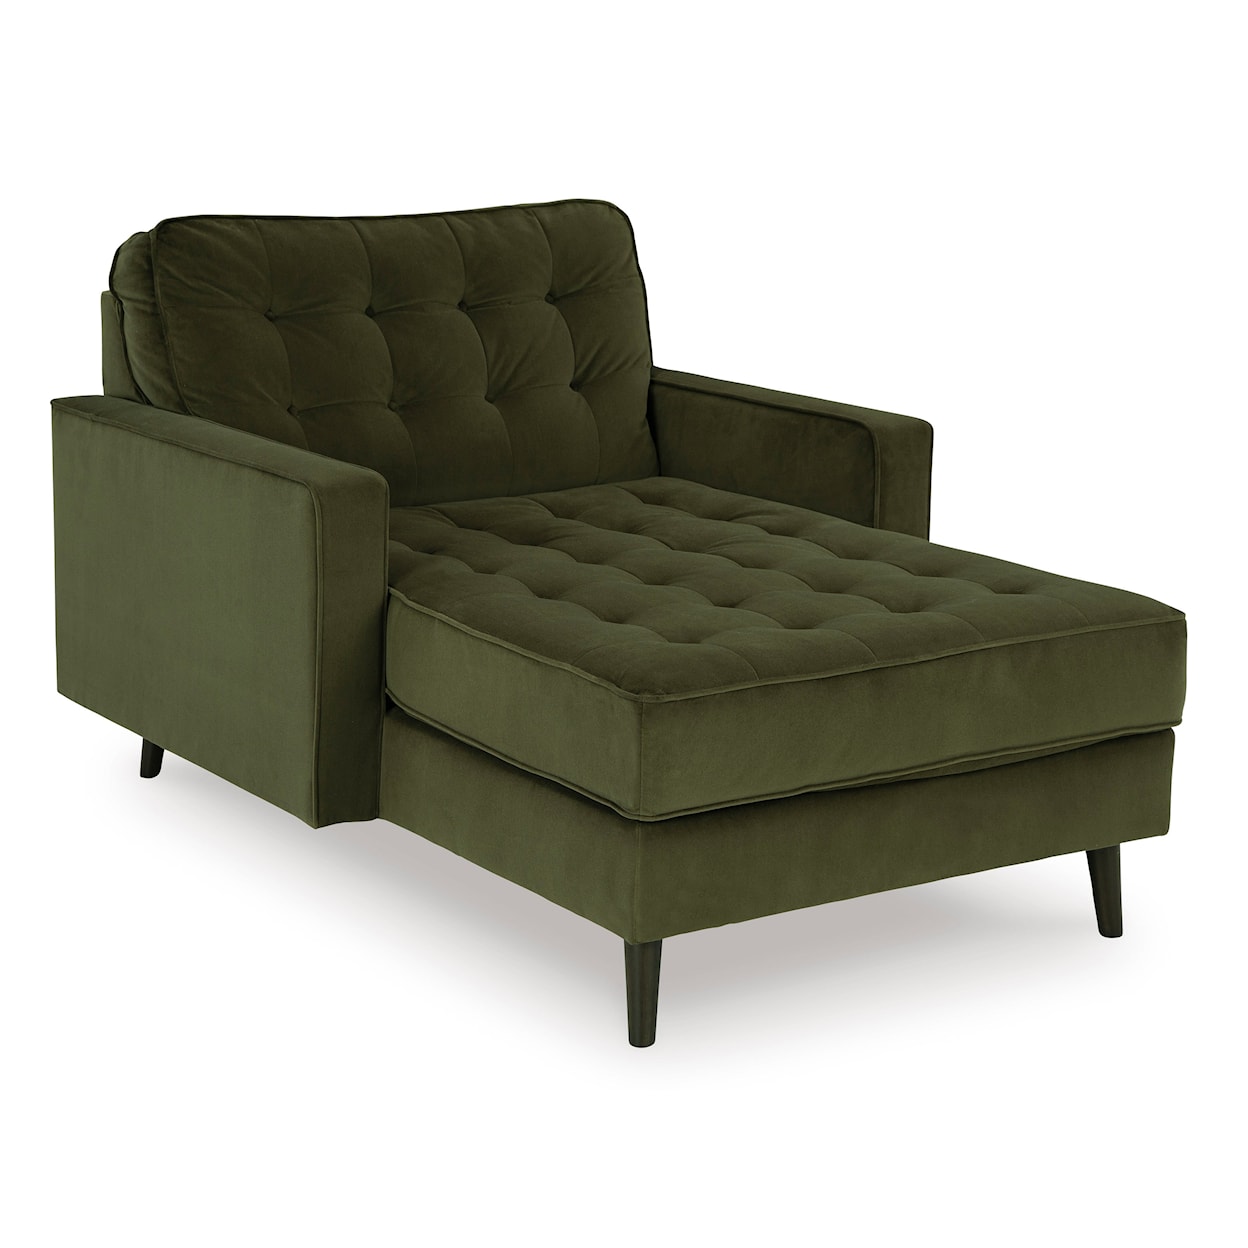 Benchcraft Reveon Lakes Chaise